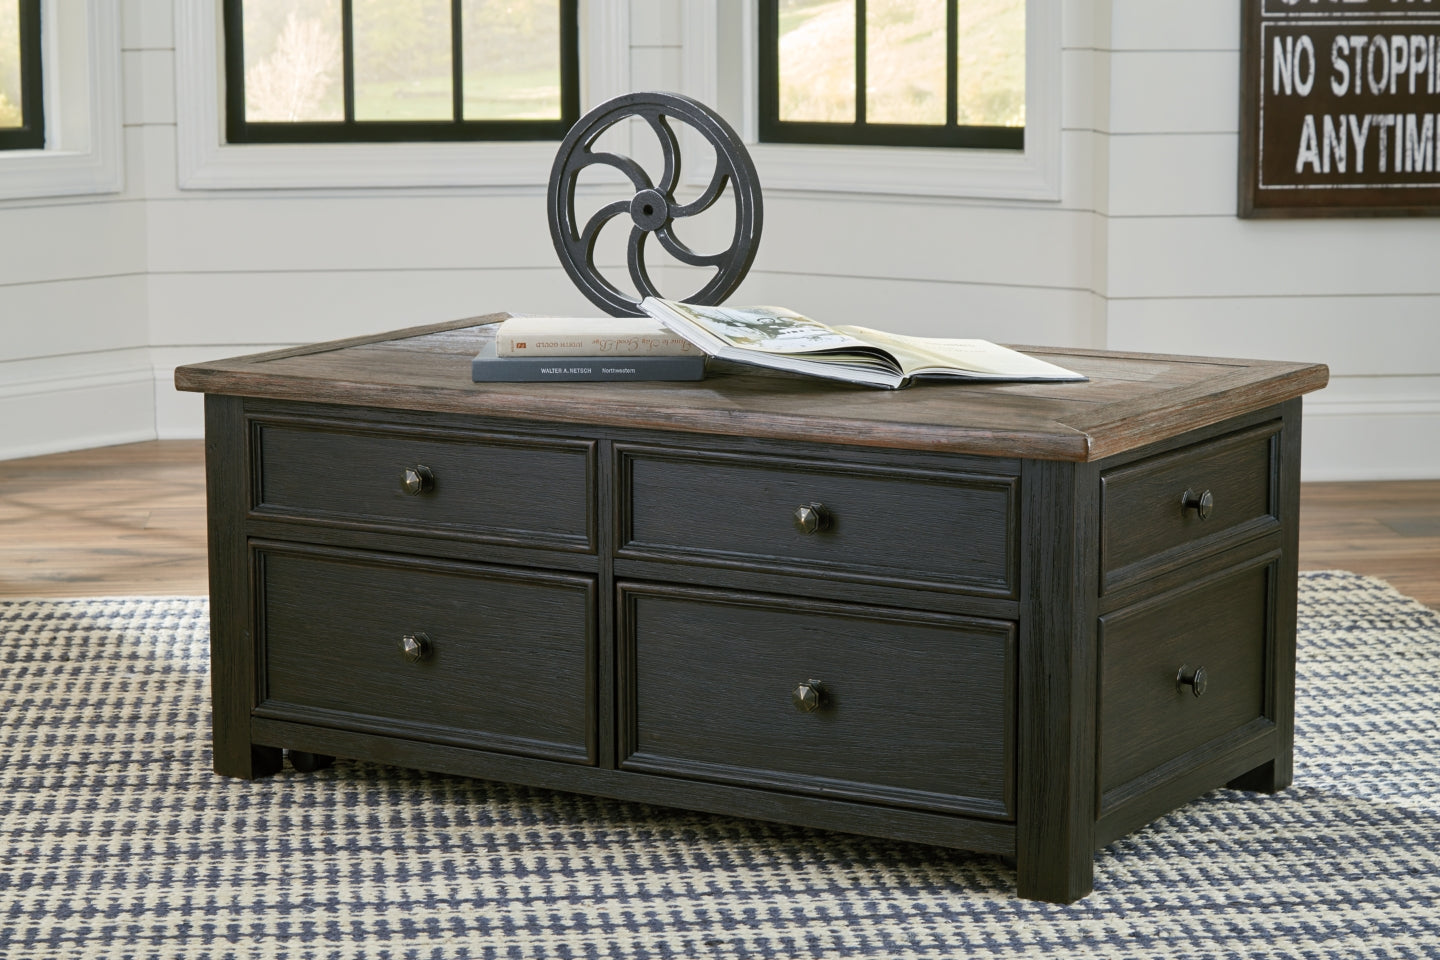 Tyler Creek Coffee Table with Lift Top - furniture place usa